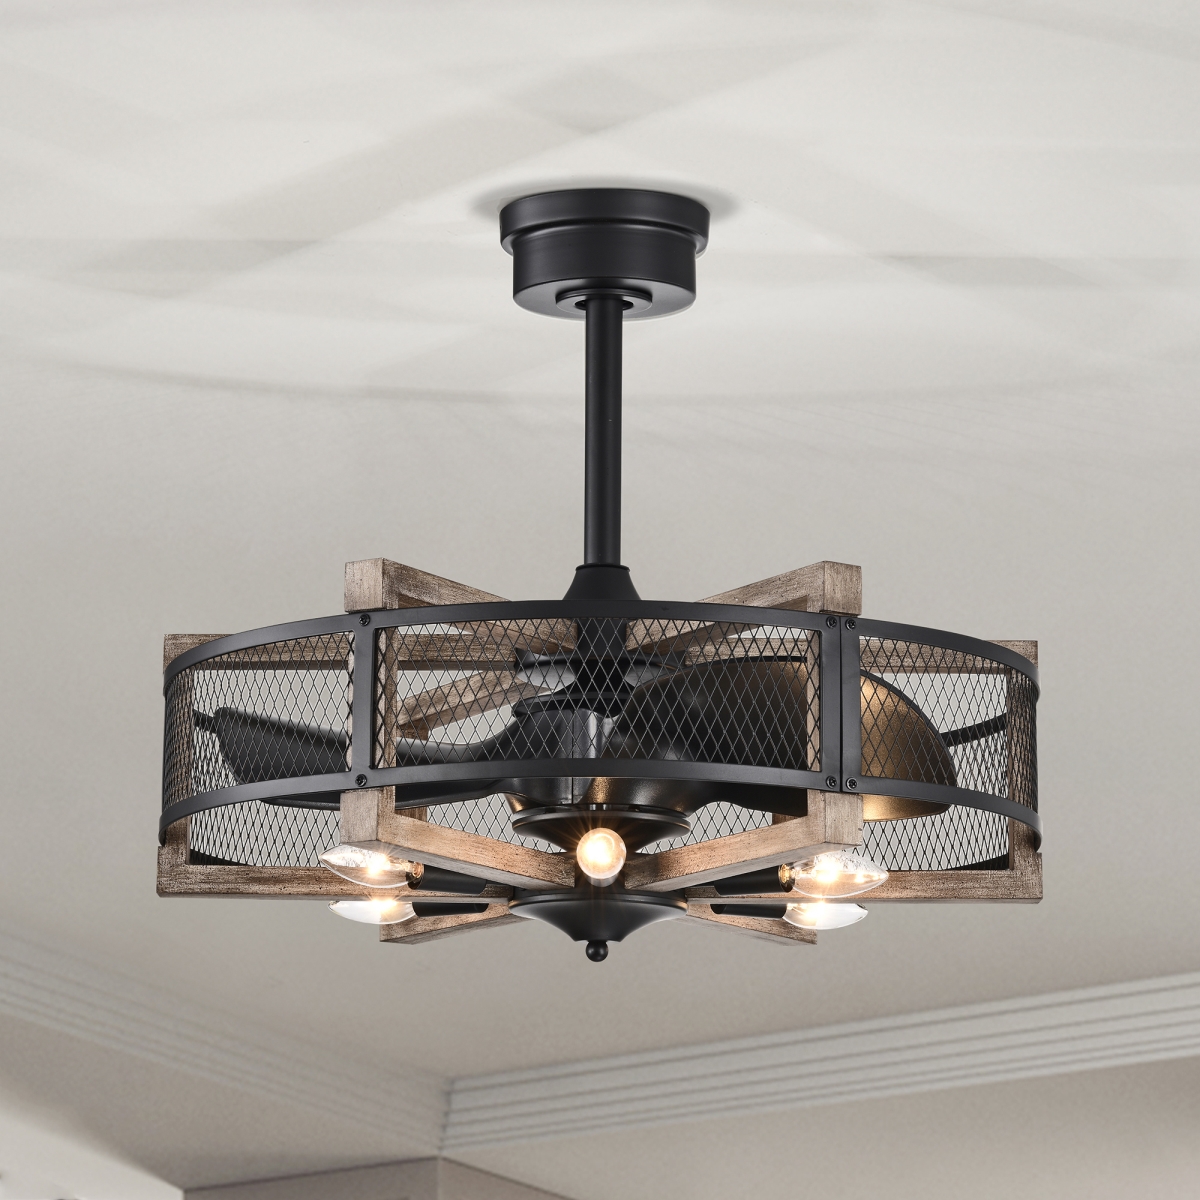 Picture of Warehouse of Tiffany DY19Y19BG Wulf 24 in. 6-Light Indoor Matte Black and Faux Wood Grain Finish Ceiling Fan with Light Kit